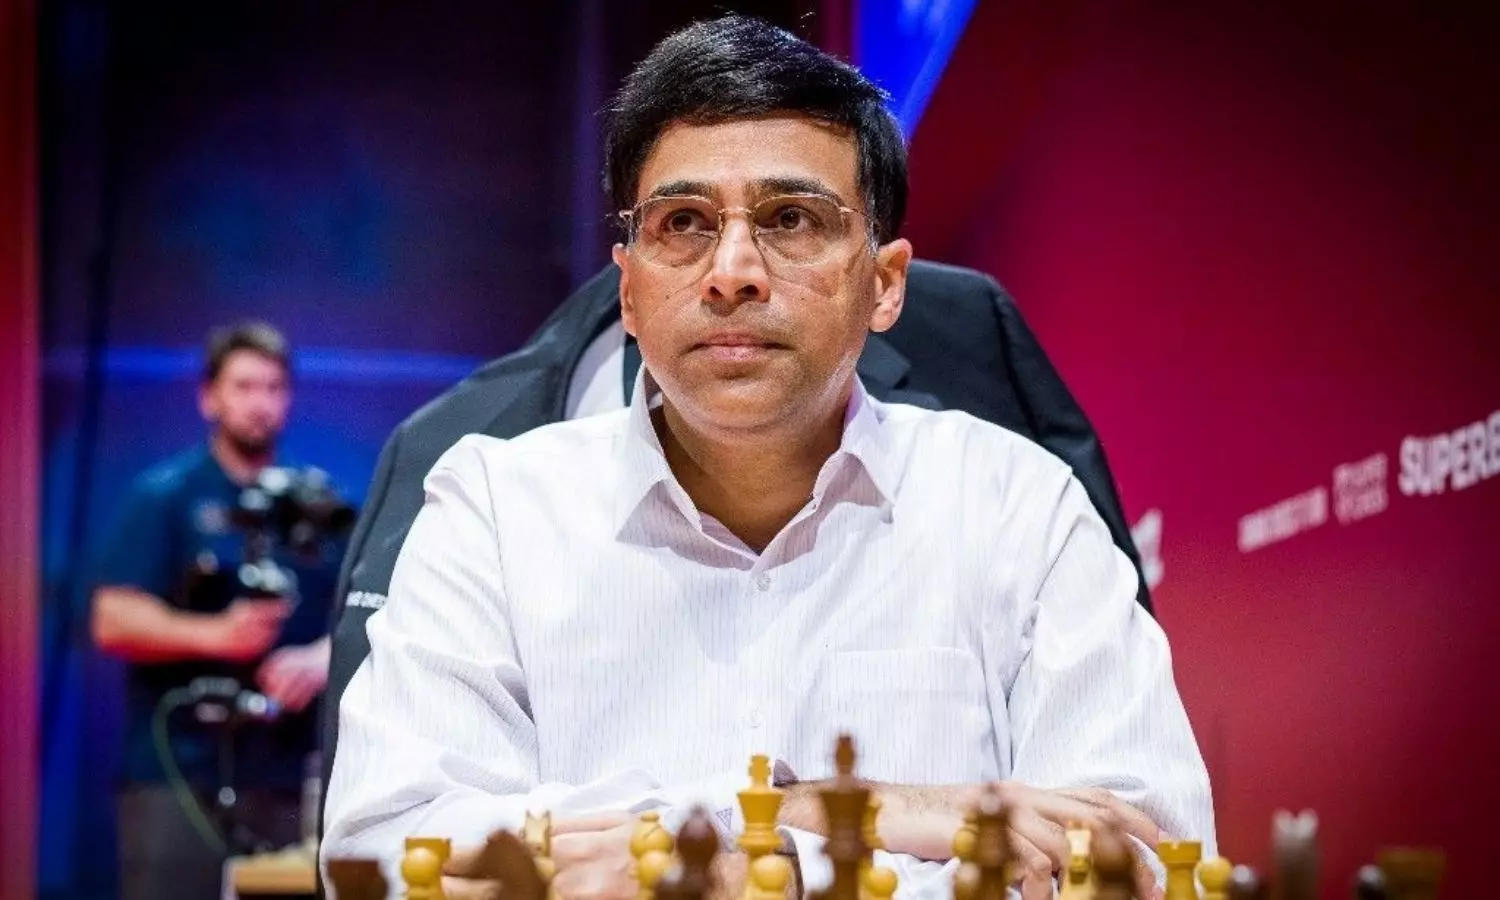 The second day of Levitov Chess week saw Viswanathan Anand still chasing  the top spot! Vishy started the day with a tough loss against…